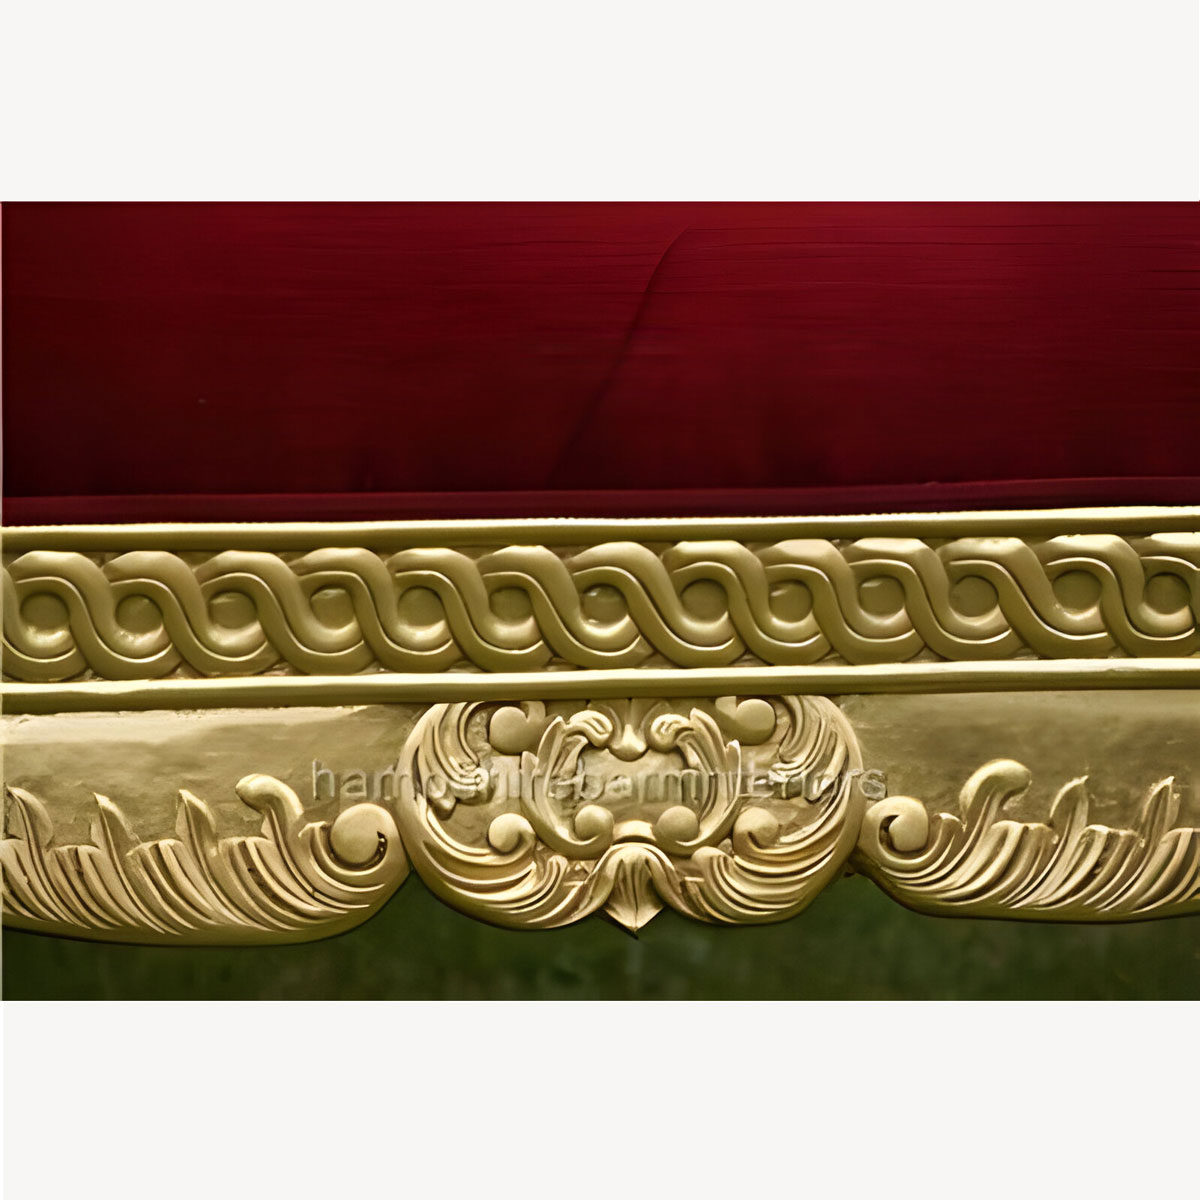 Beautiful Red Velvet And Gold Leaf Hilton Chaise Longue 3 - Hampshire Barn Interiors - Beautiful Red Velvet And Gold Leaf Hilton Chaise Longue -